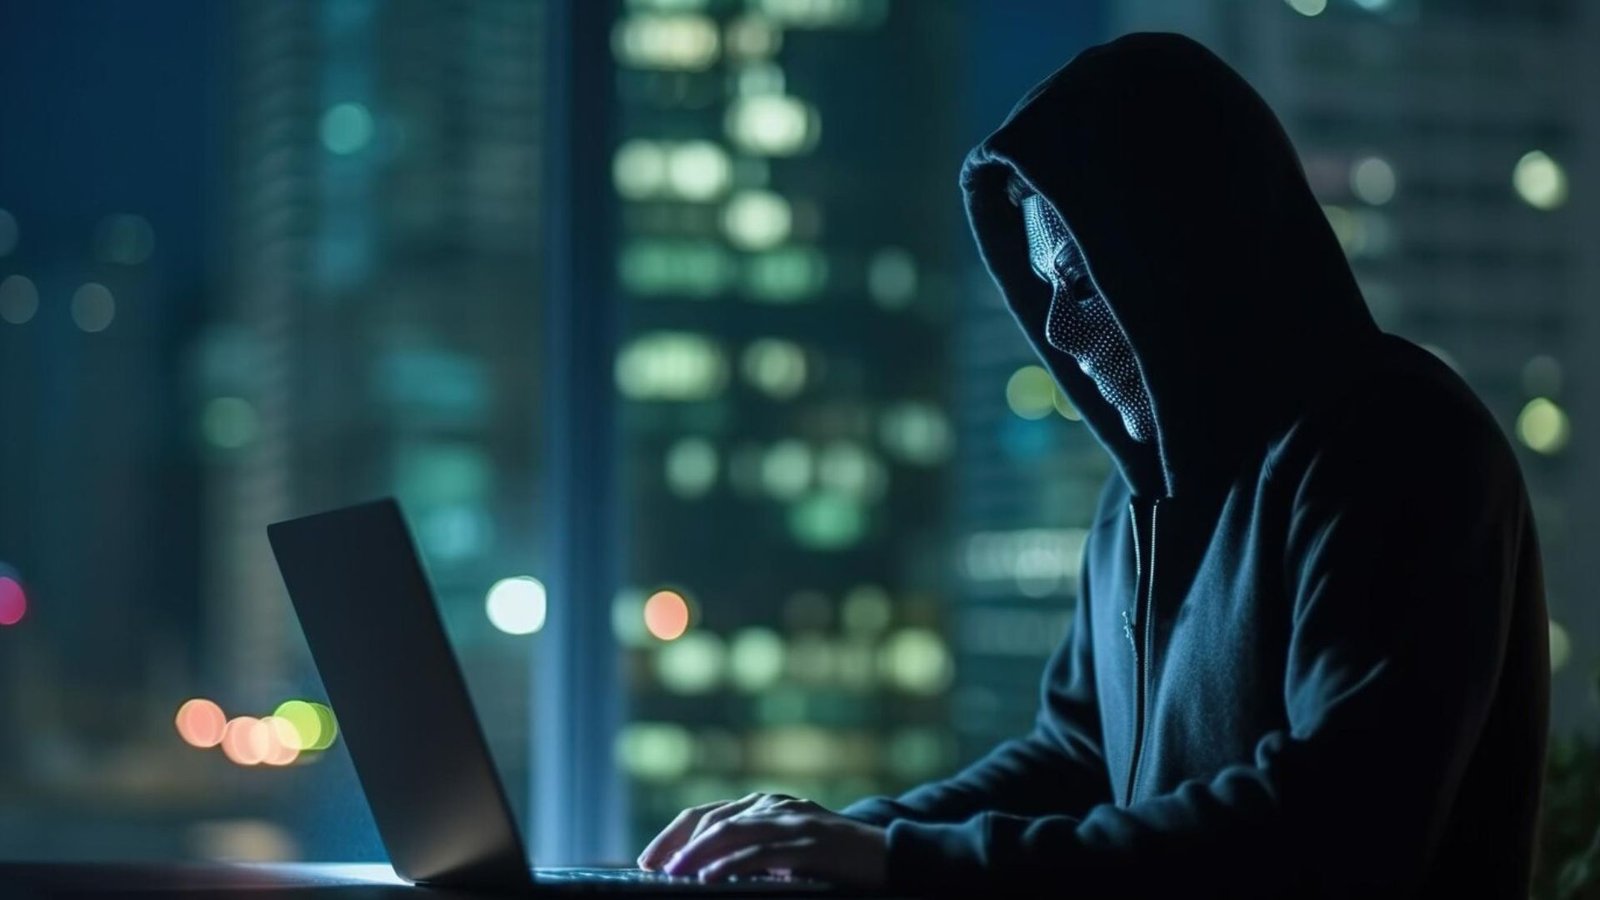 A man in the world of hacking as he is hacking a computer